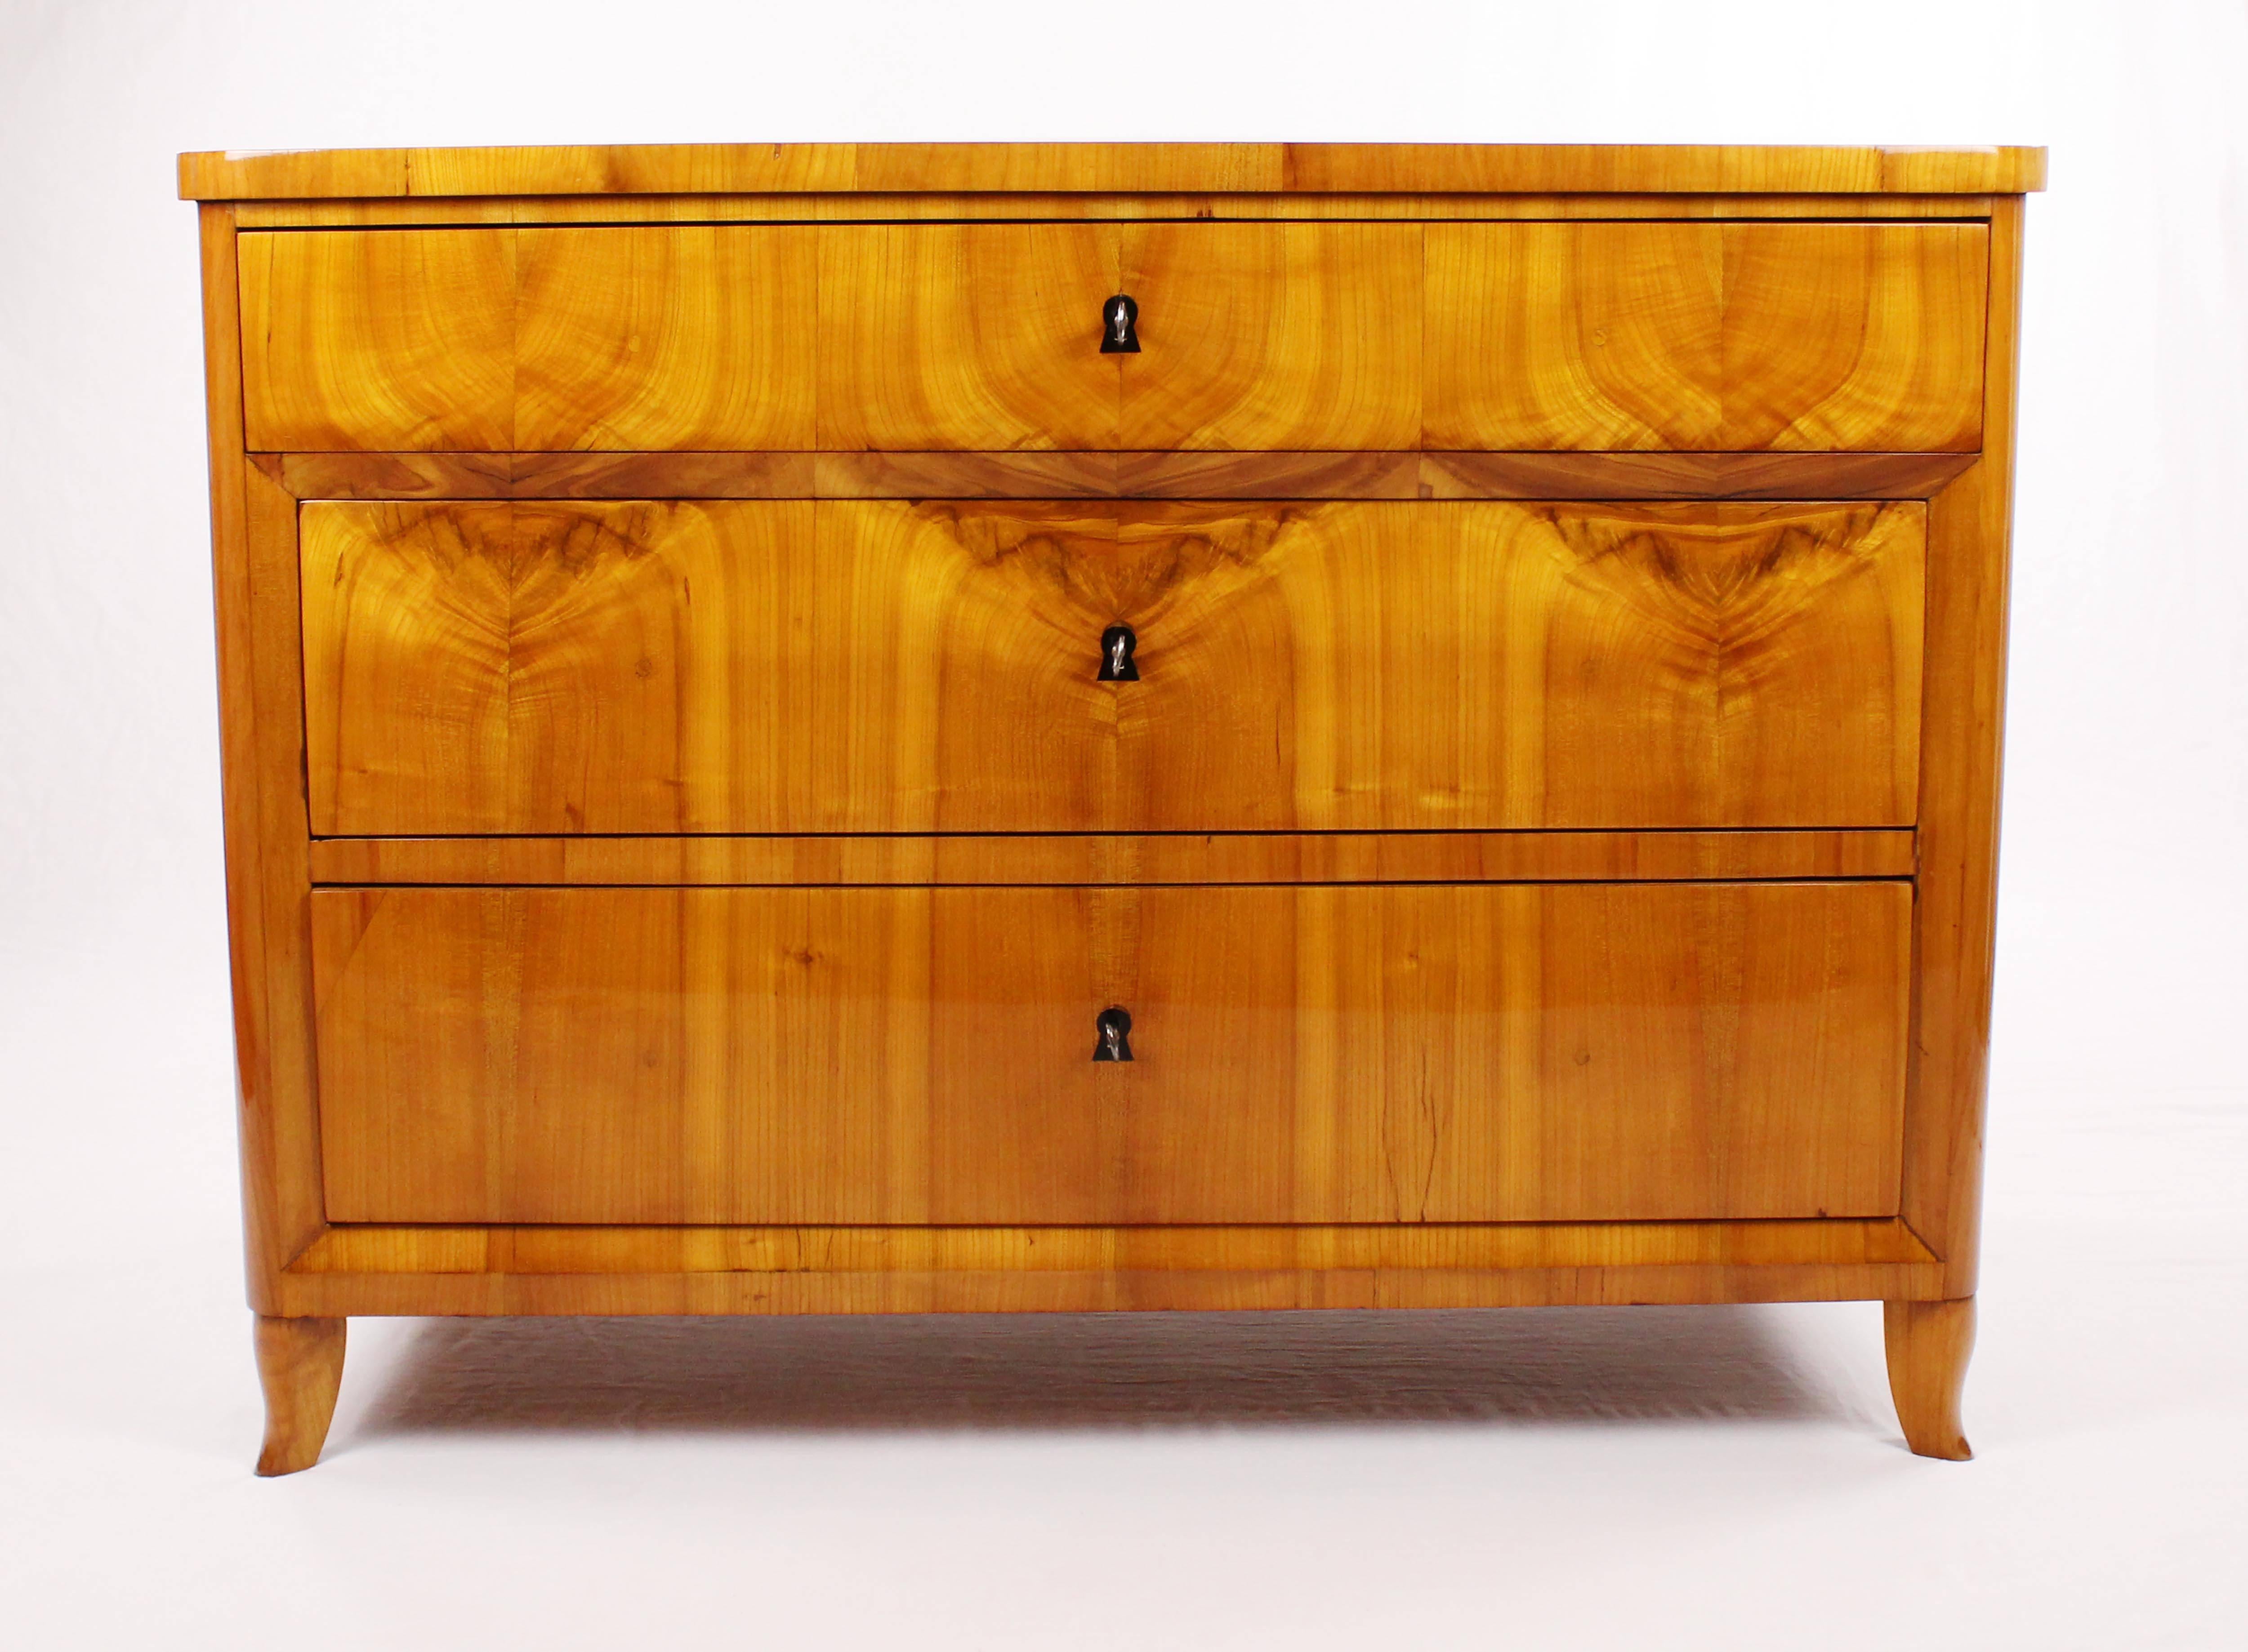 • Biedermeier period chest of drawers, circa 1820-1830
• Cherry tree veneer
• 3 drawers
• Unique reflected veneer
• Ebonized key signs
• Rounded corners
• Restored state
• French shellac hand polish
• Height 86.5 cm, width 117 cm, depth 57